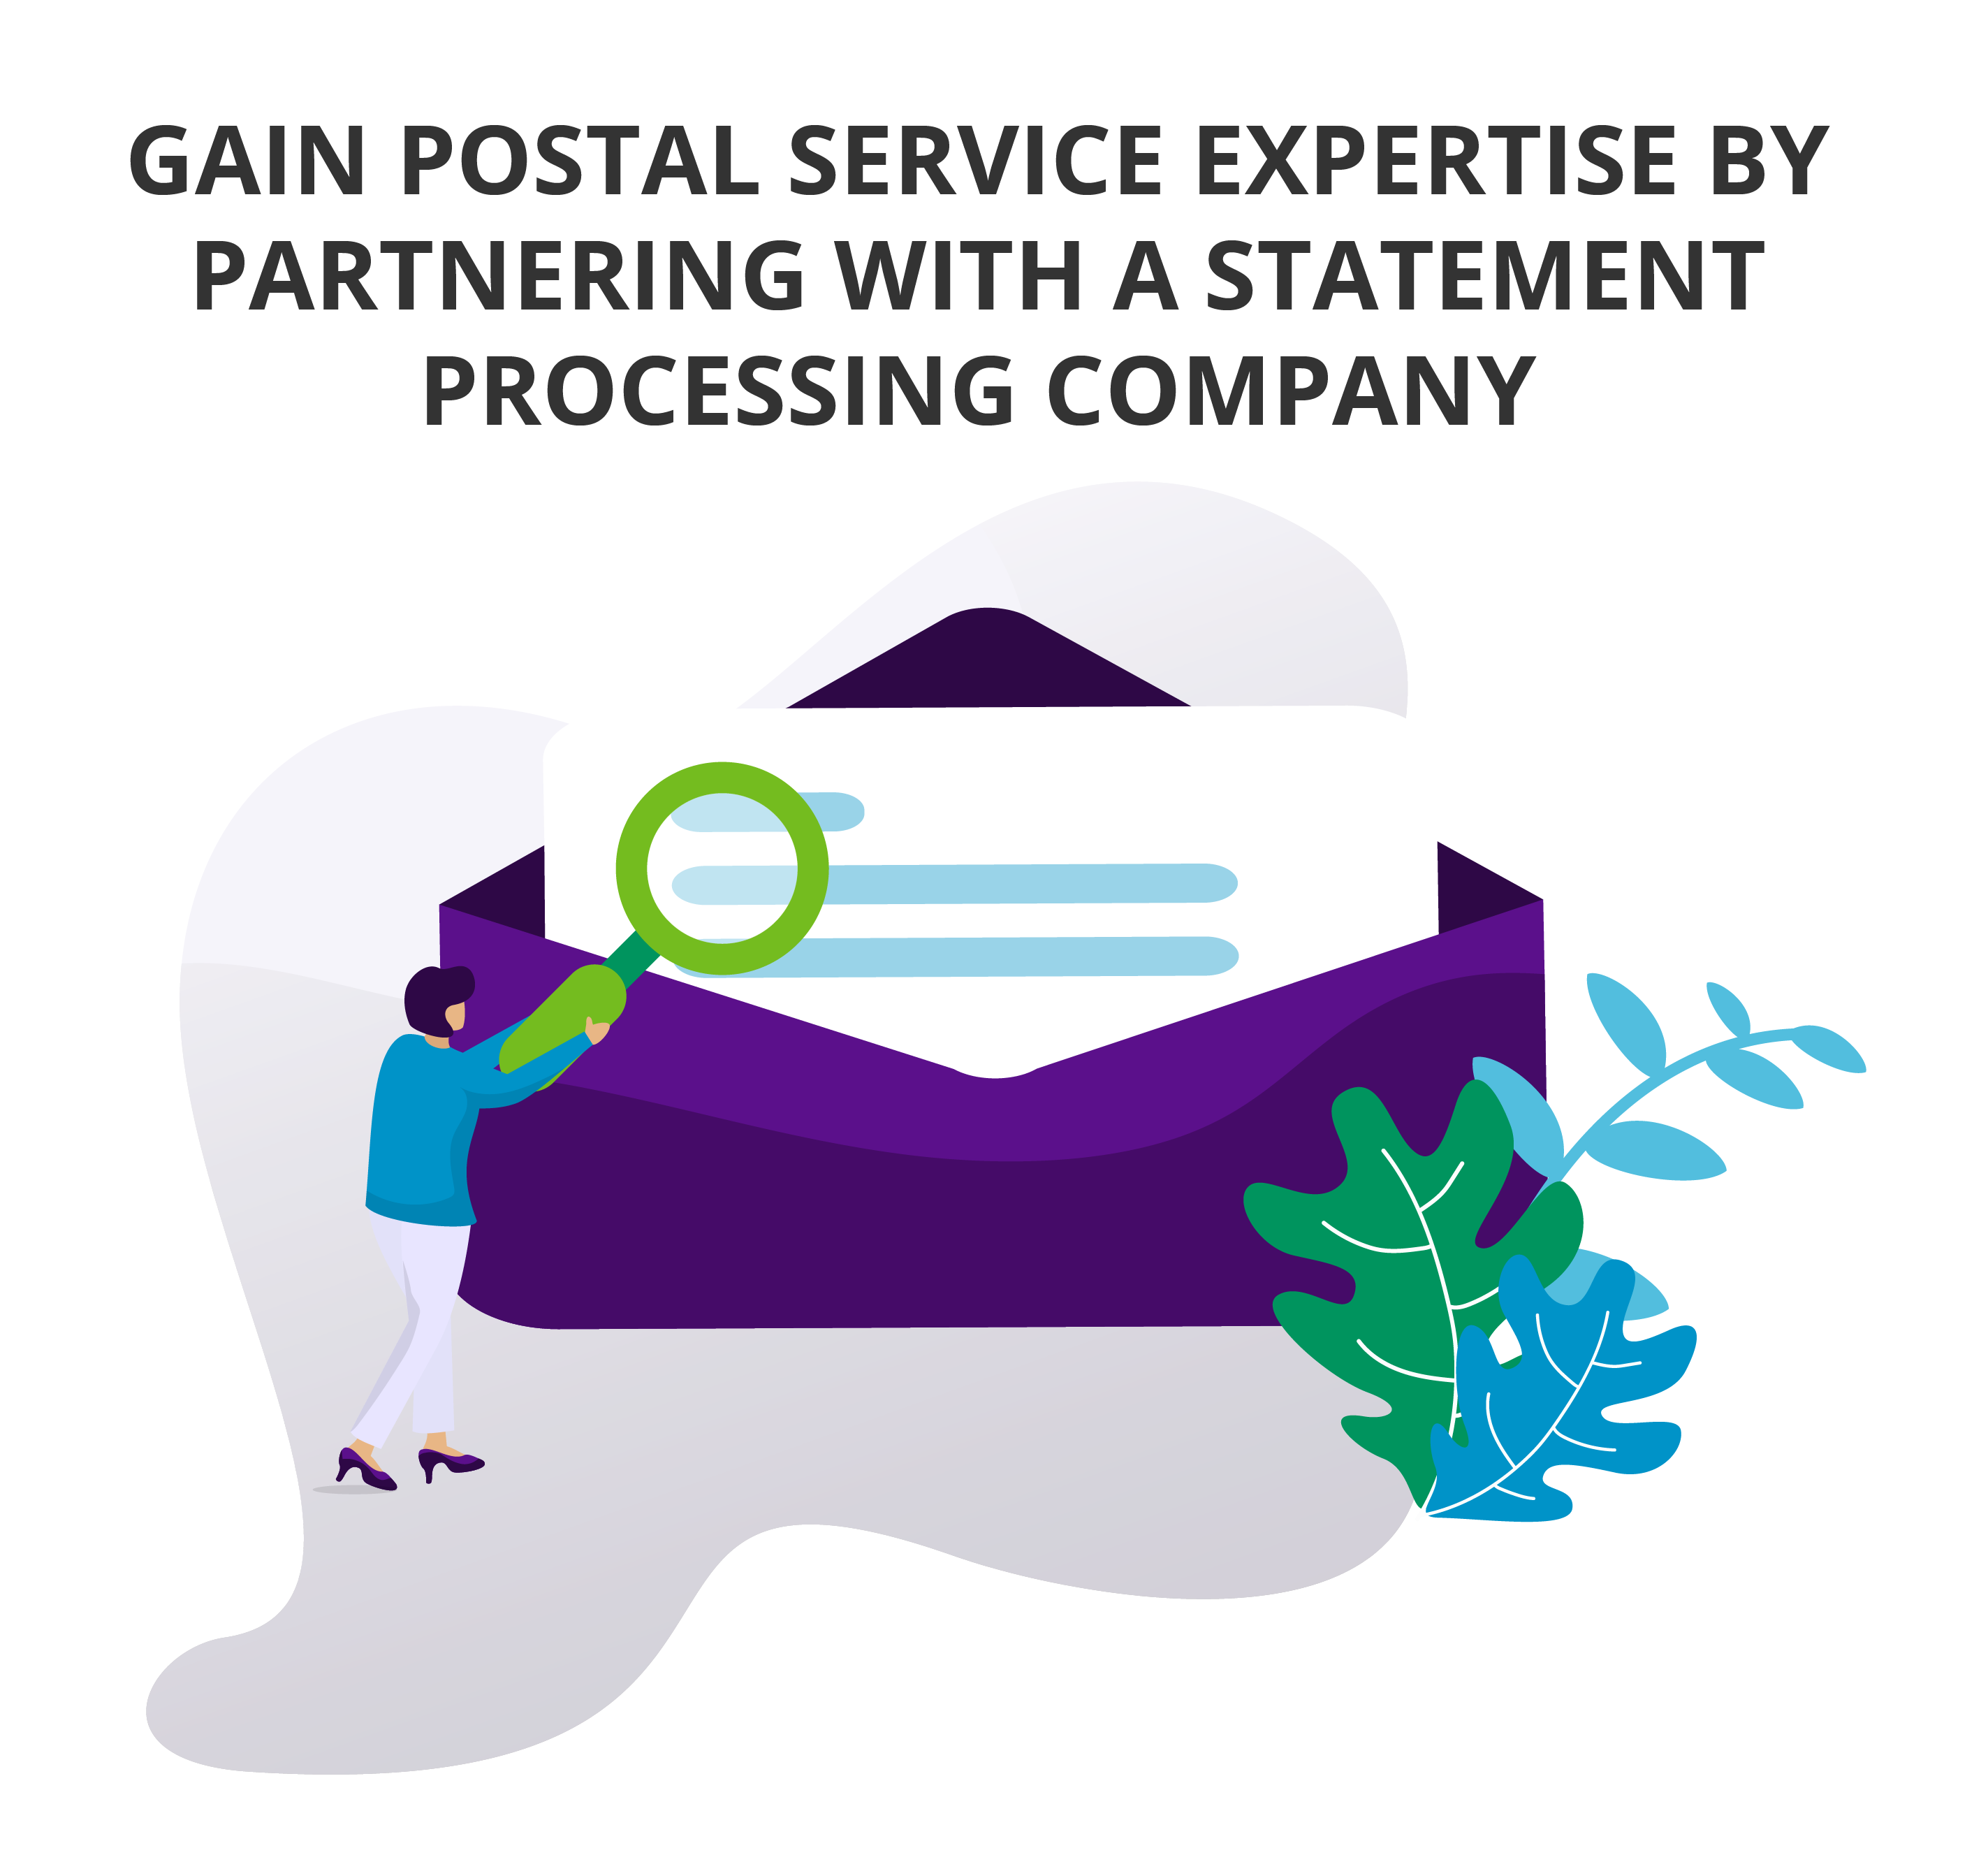 Gain Postal Service Expertise by Partnering with a Statement Processing Company